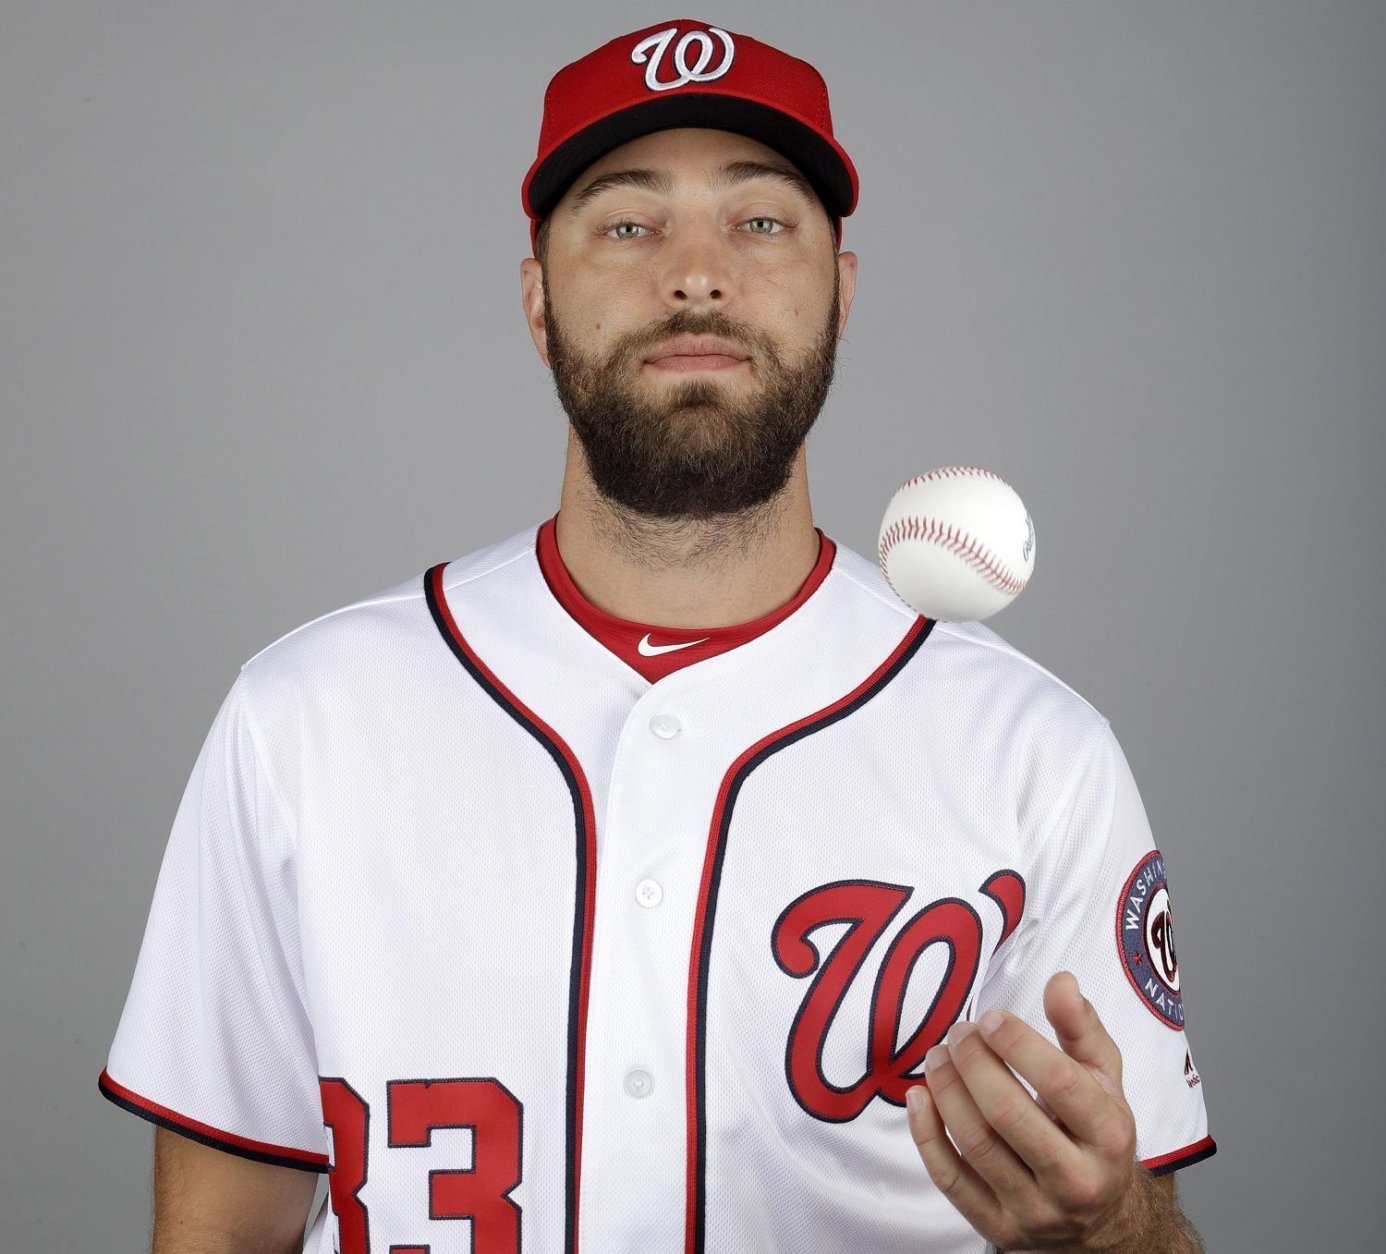 This is a 2019 photo of Matt Grace of the Washington Nationals baseball team. This image reflects the 2019 active roster as of Friday, Feb. 22, 2019, when this image was taken. (AP Photo/Jeff Roberson)